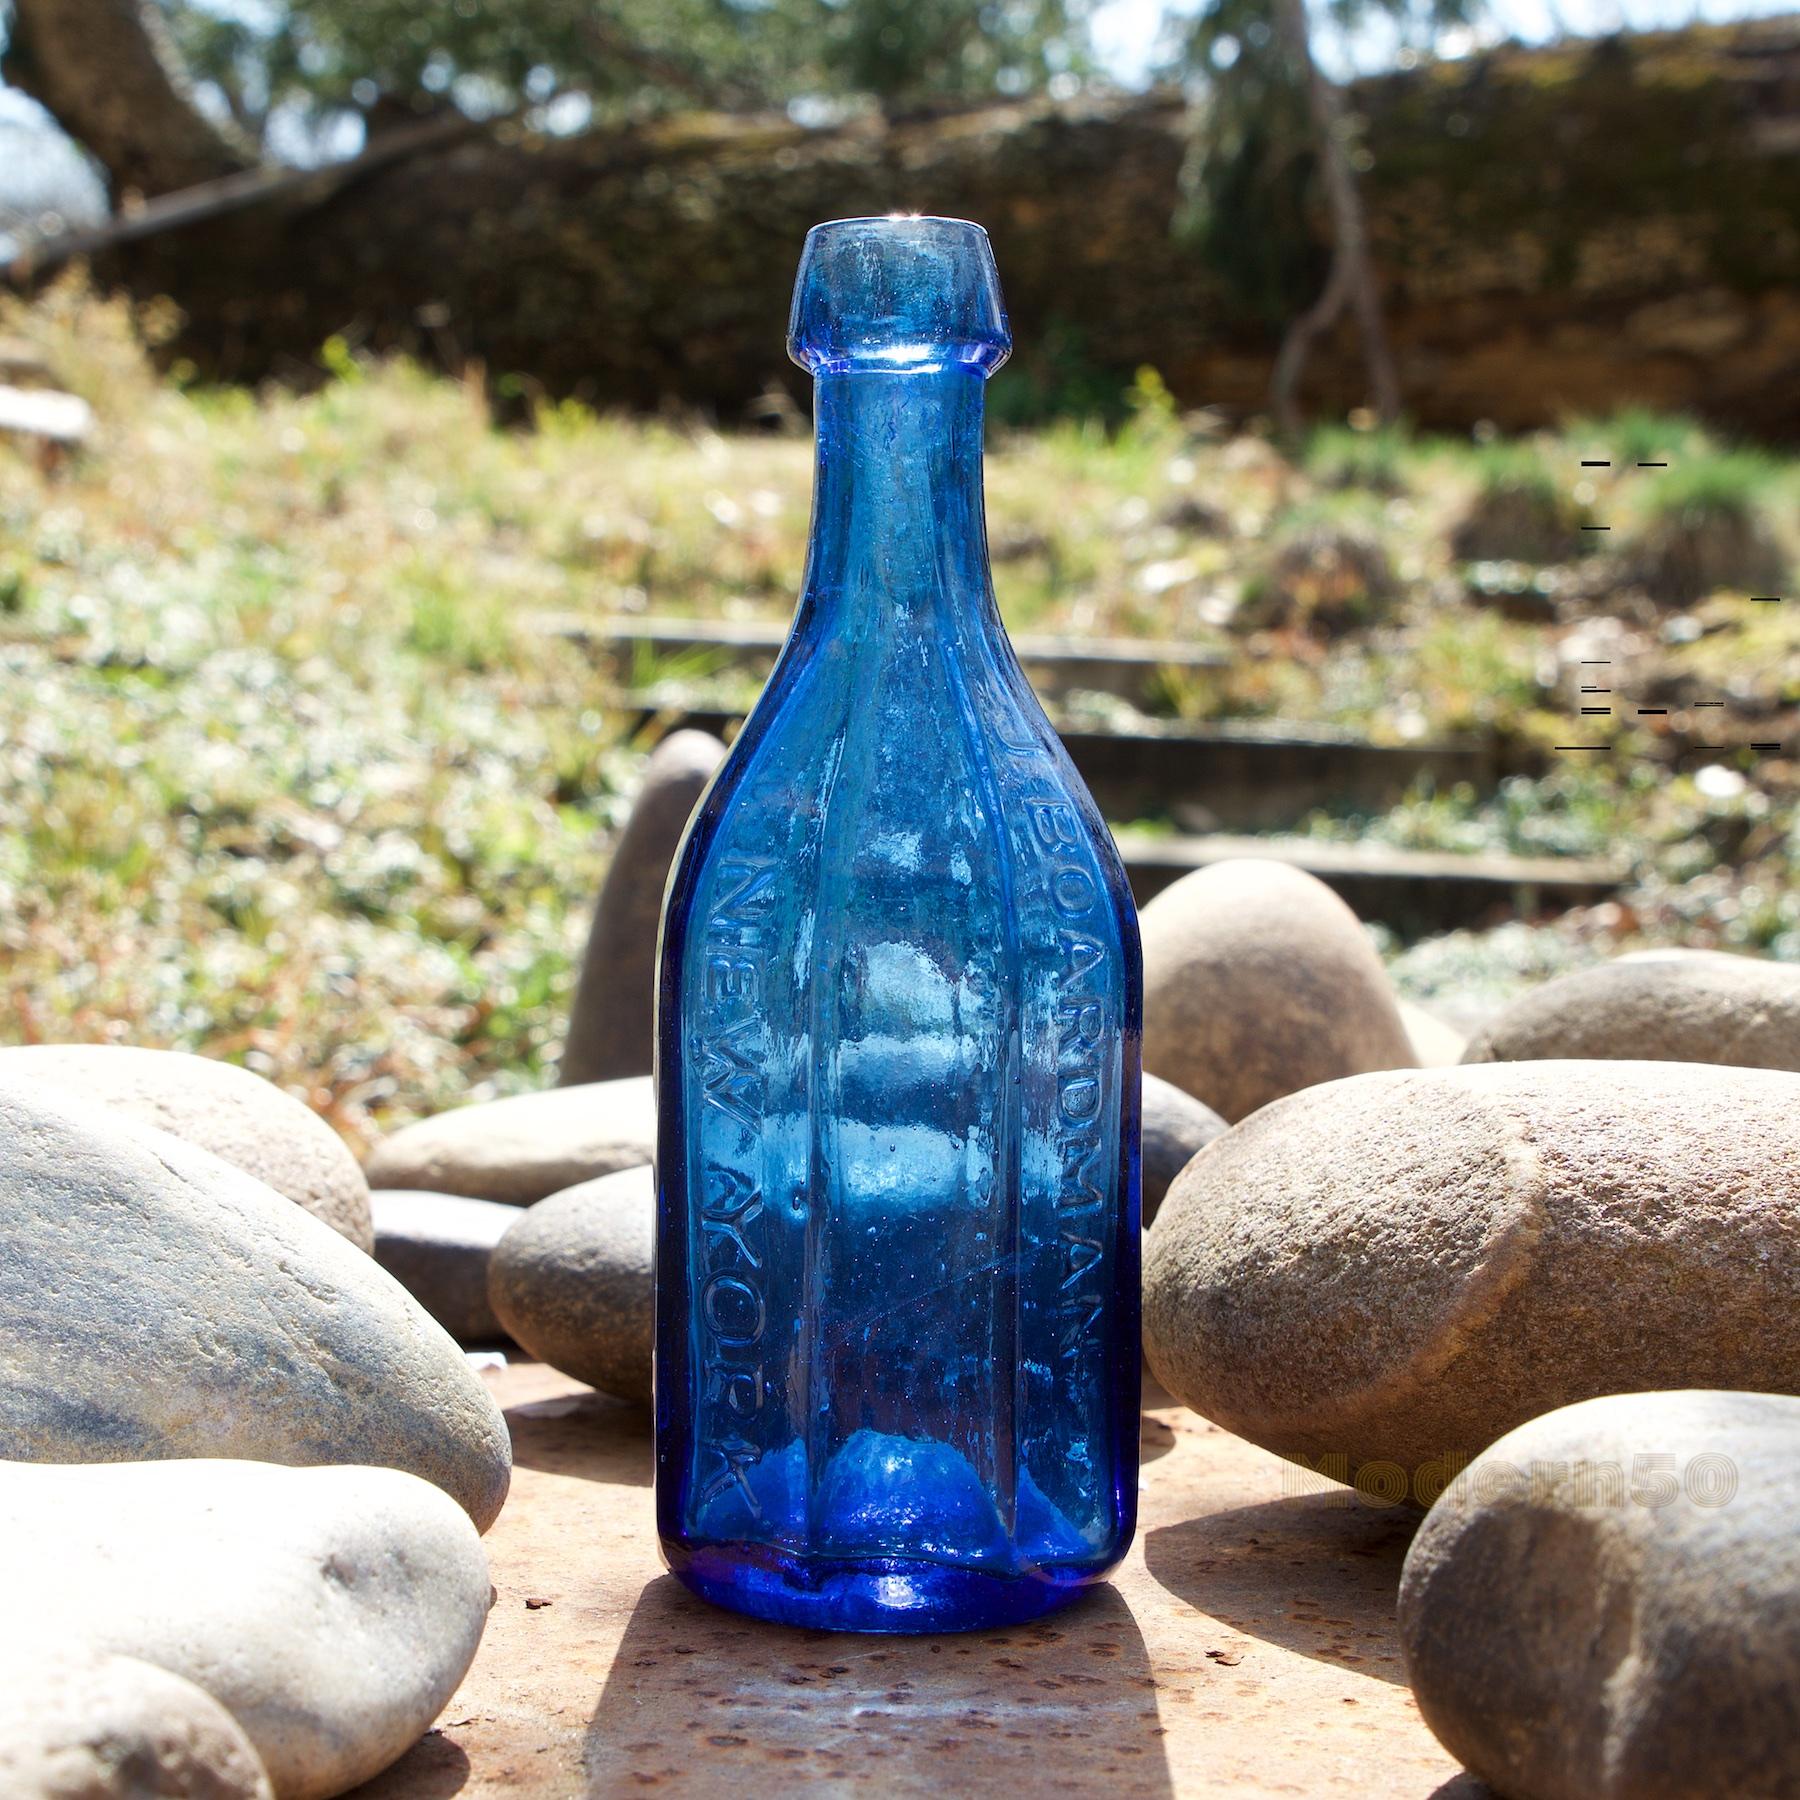 J. Boardman & Company New York Mineral Waters, this bottle is never sold. Soda water bottle, America, 1845-1860. Octagonal, bright, medium sapphire blue, applied sloping collared mouth - iron pontil mark, height 7 1/2 inches tall. Rare in very fine